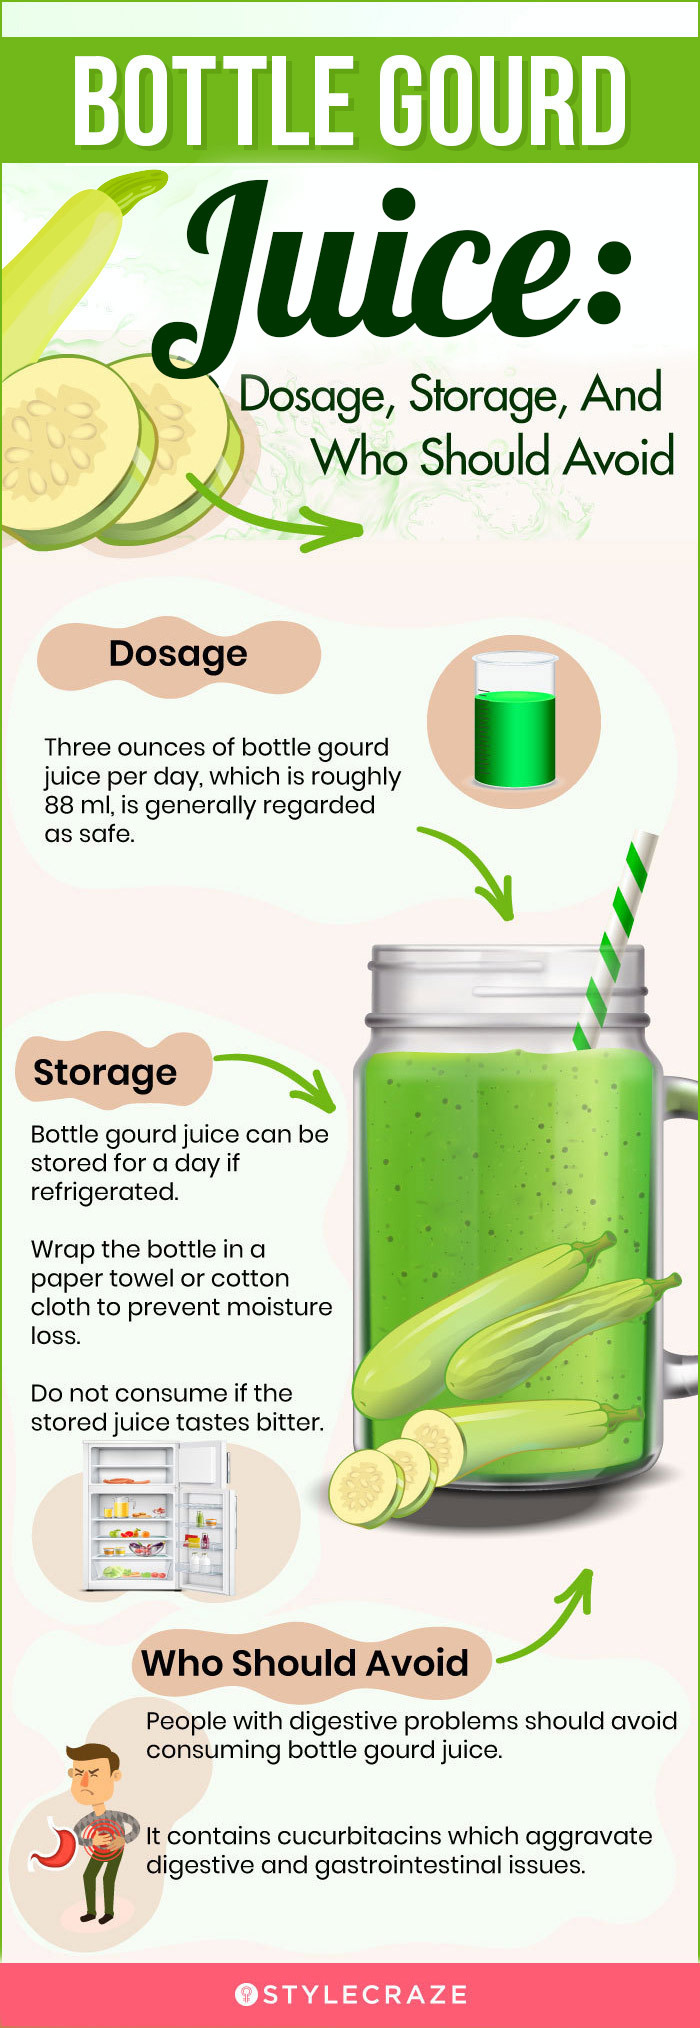 bottle gourd juice dosage storage and who should avoid [infographic]